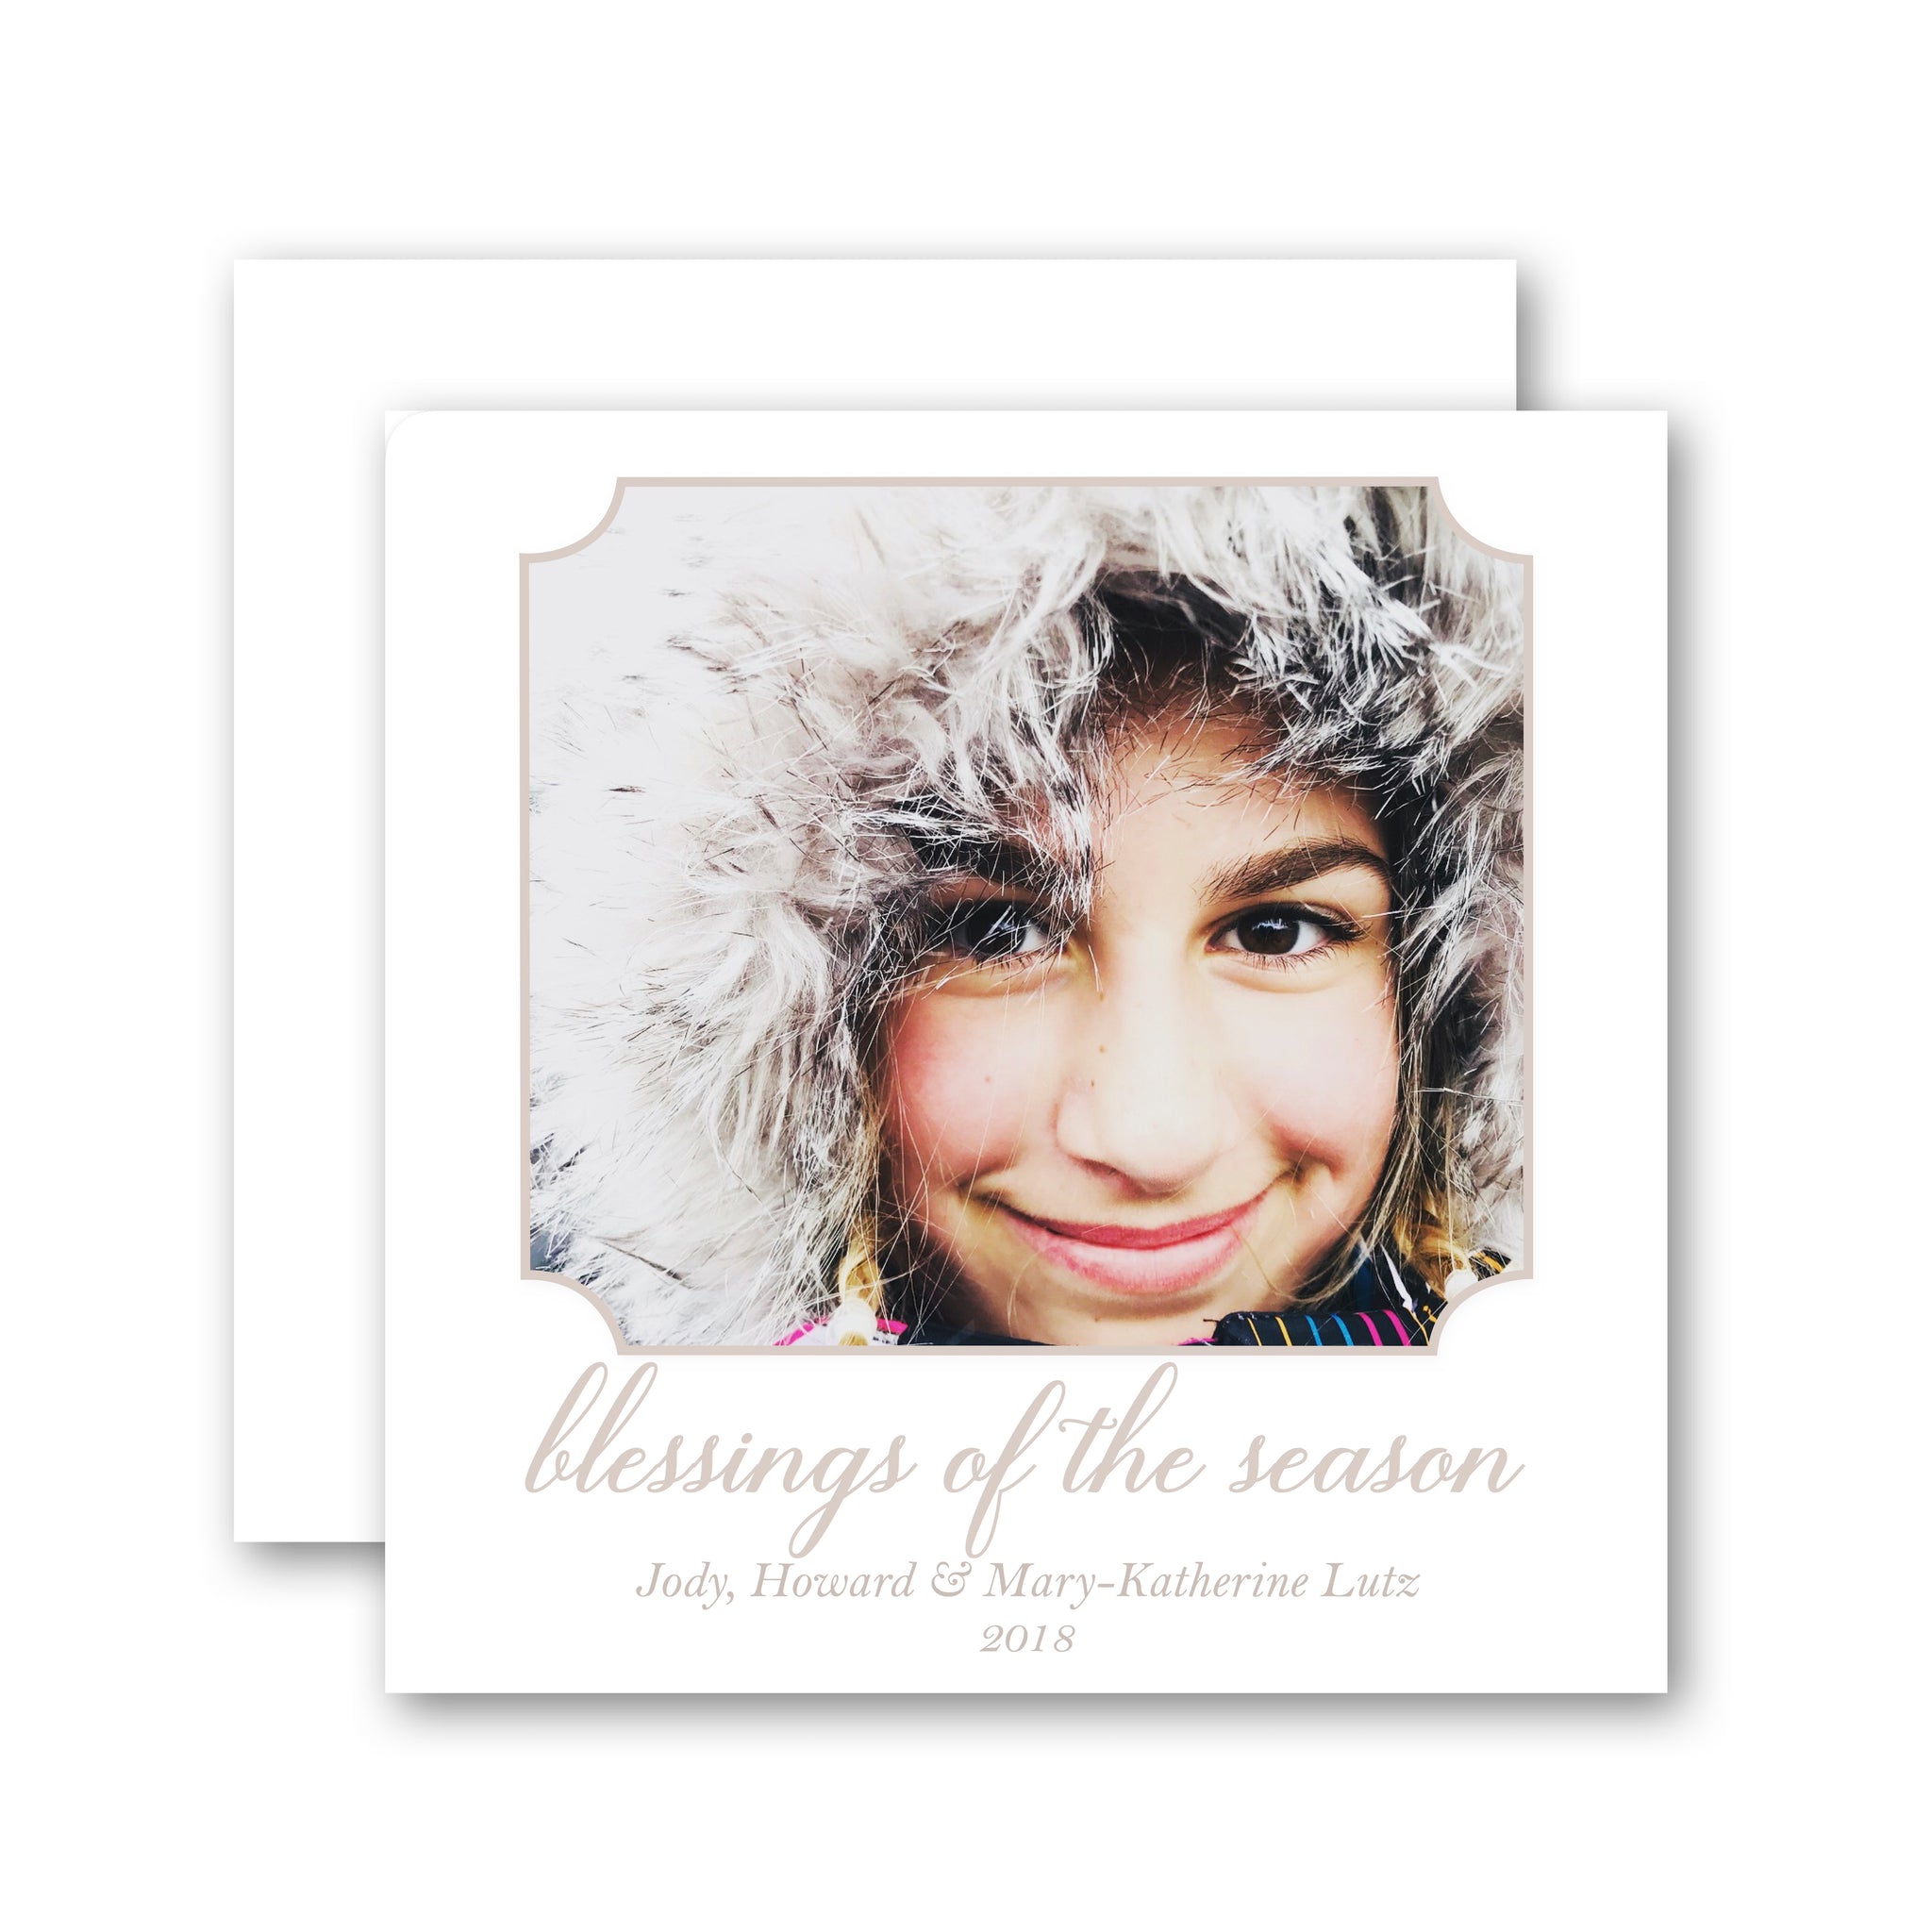 Blessings of the Season Holiday Card (Square)